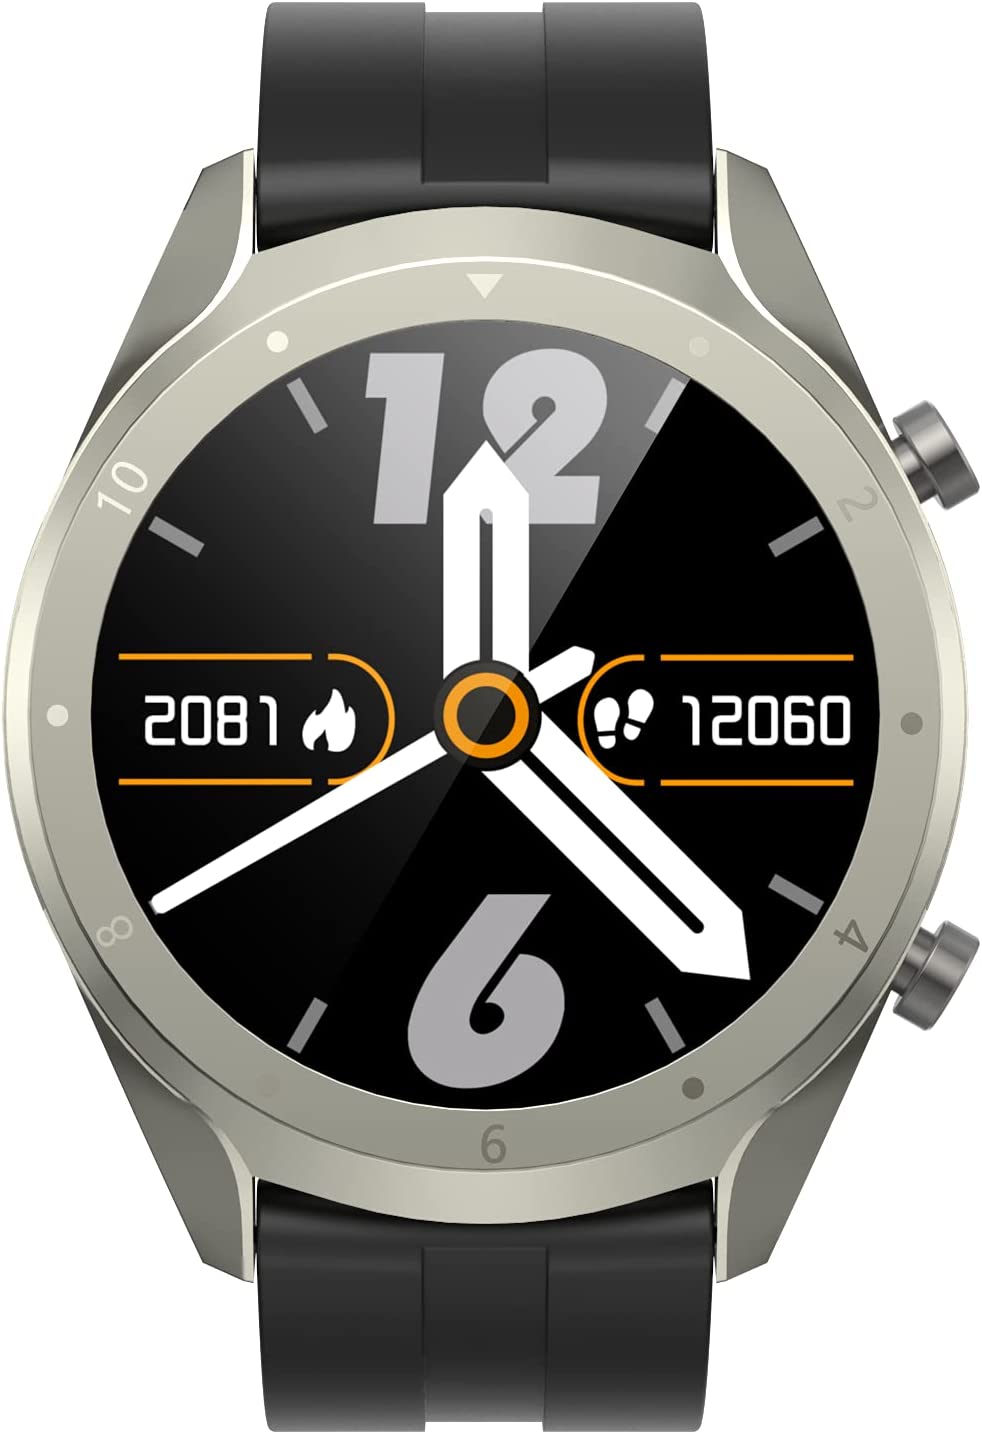 Buy G-Tab GT2 Smart Watch In Bahrain| G-Tab Smart Watches | Halabh fitness, care